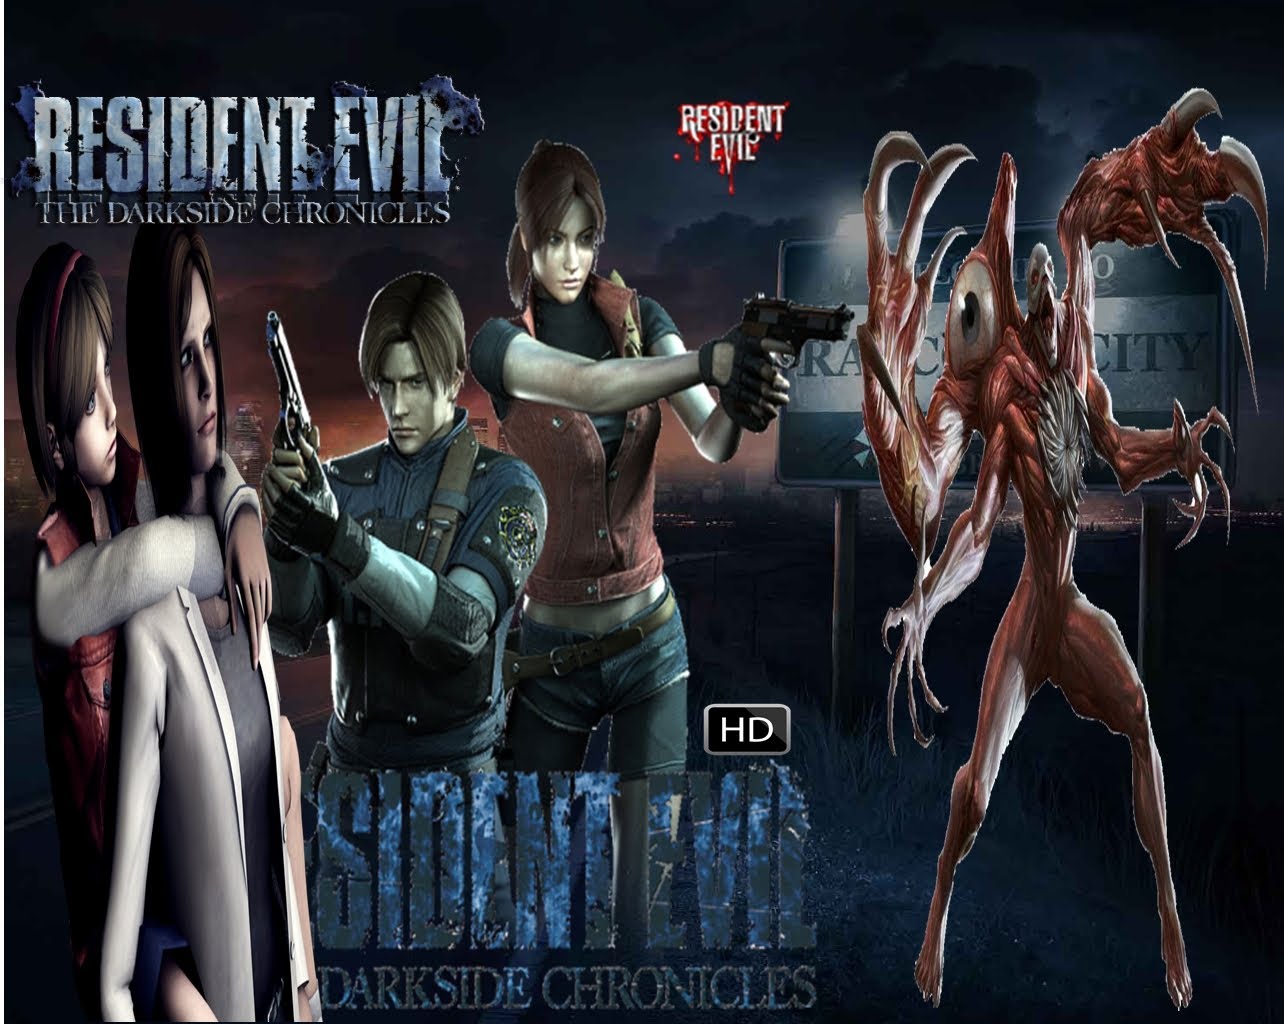 Resident evil collection